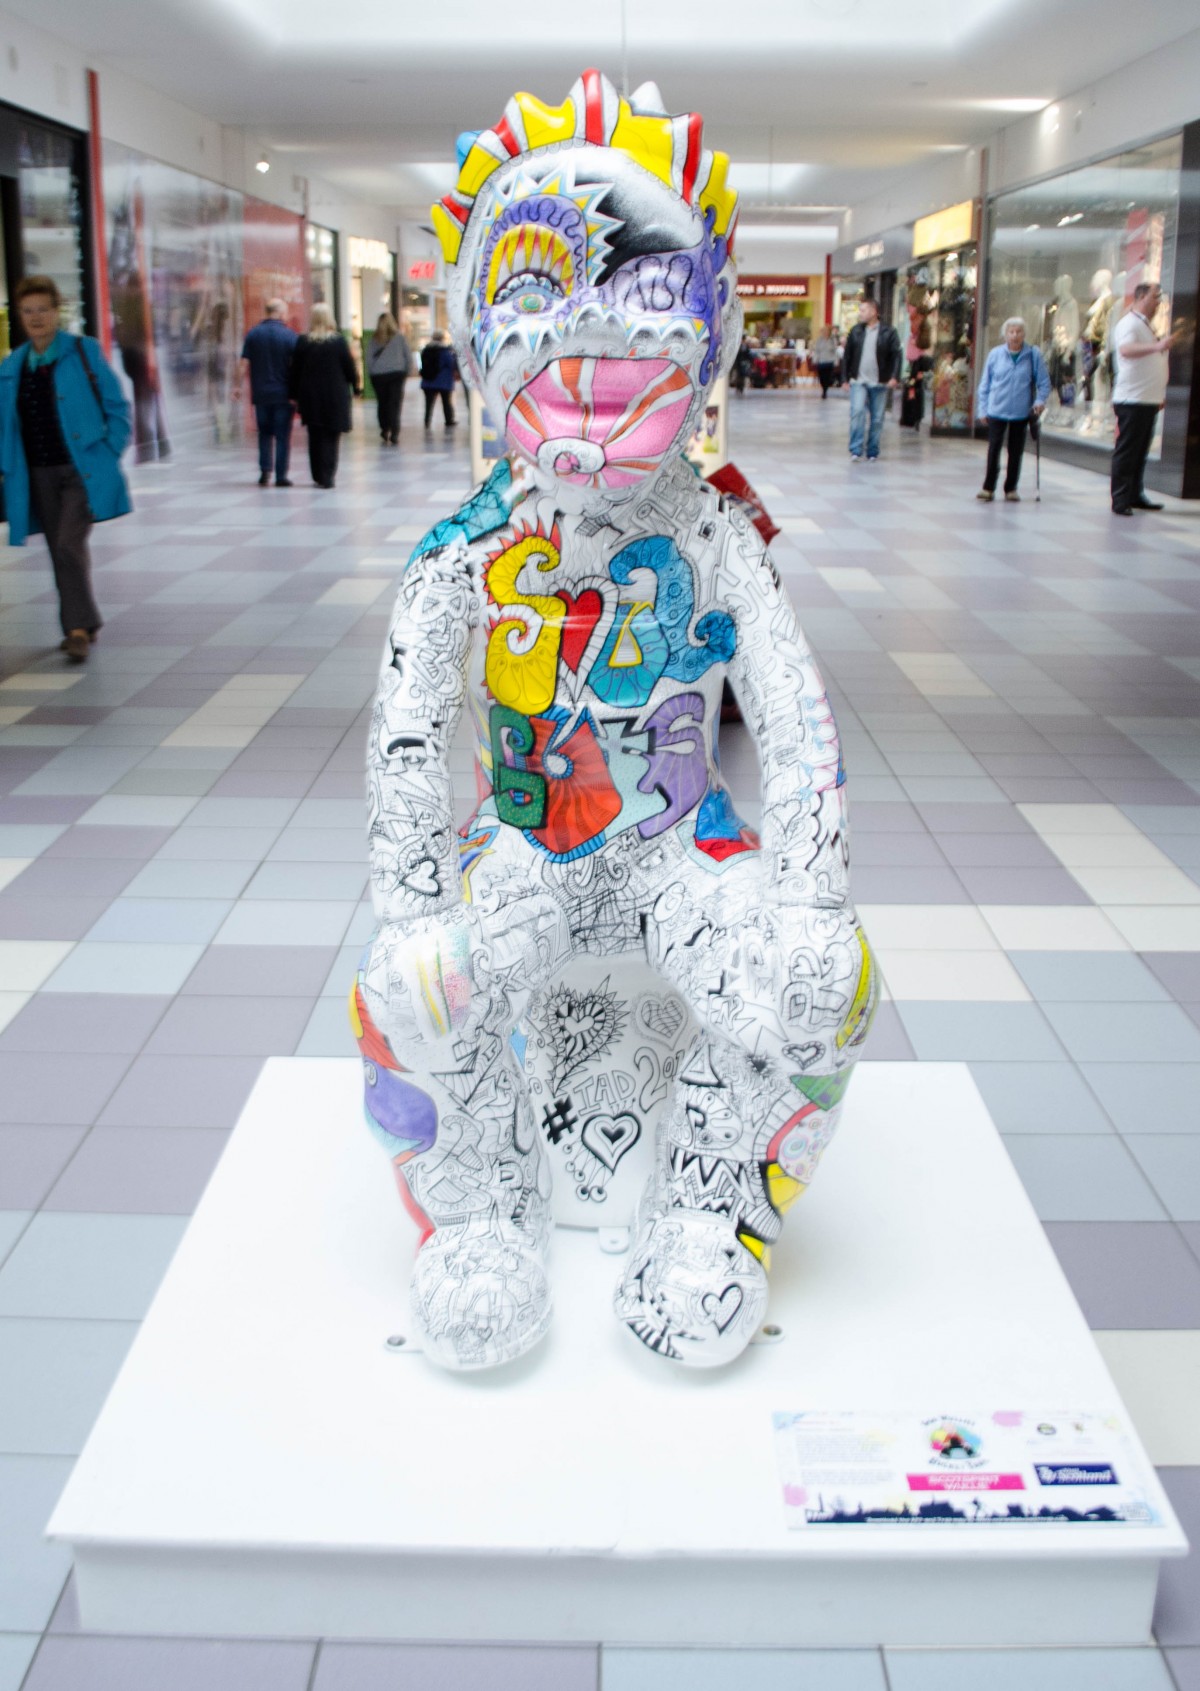 This ScotSpirit Wullie was designed by Vanessa Gibson.  Vanessa teaches art and design in a school in Fife. Her Wullie is covered in a poem that sums him up perfectly!